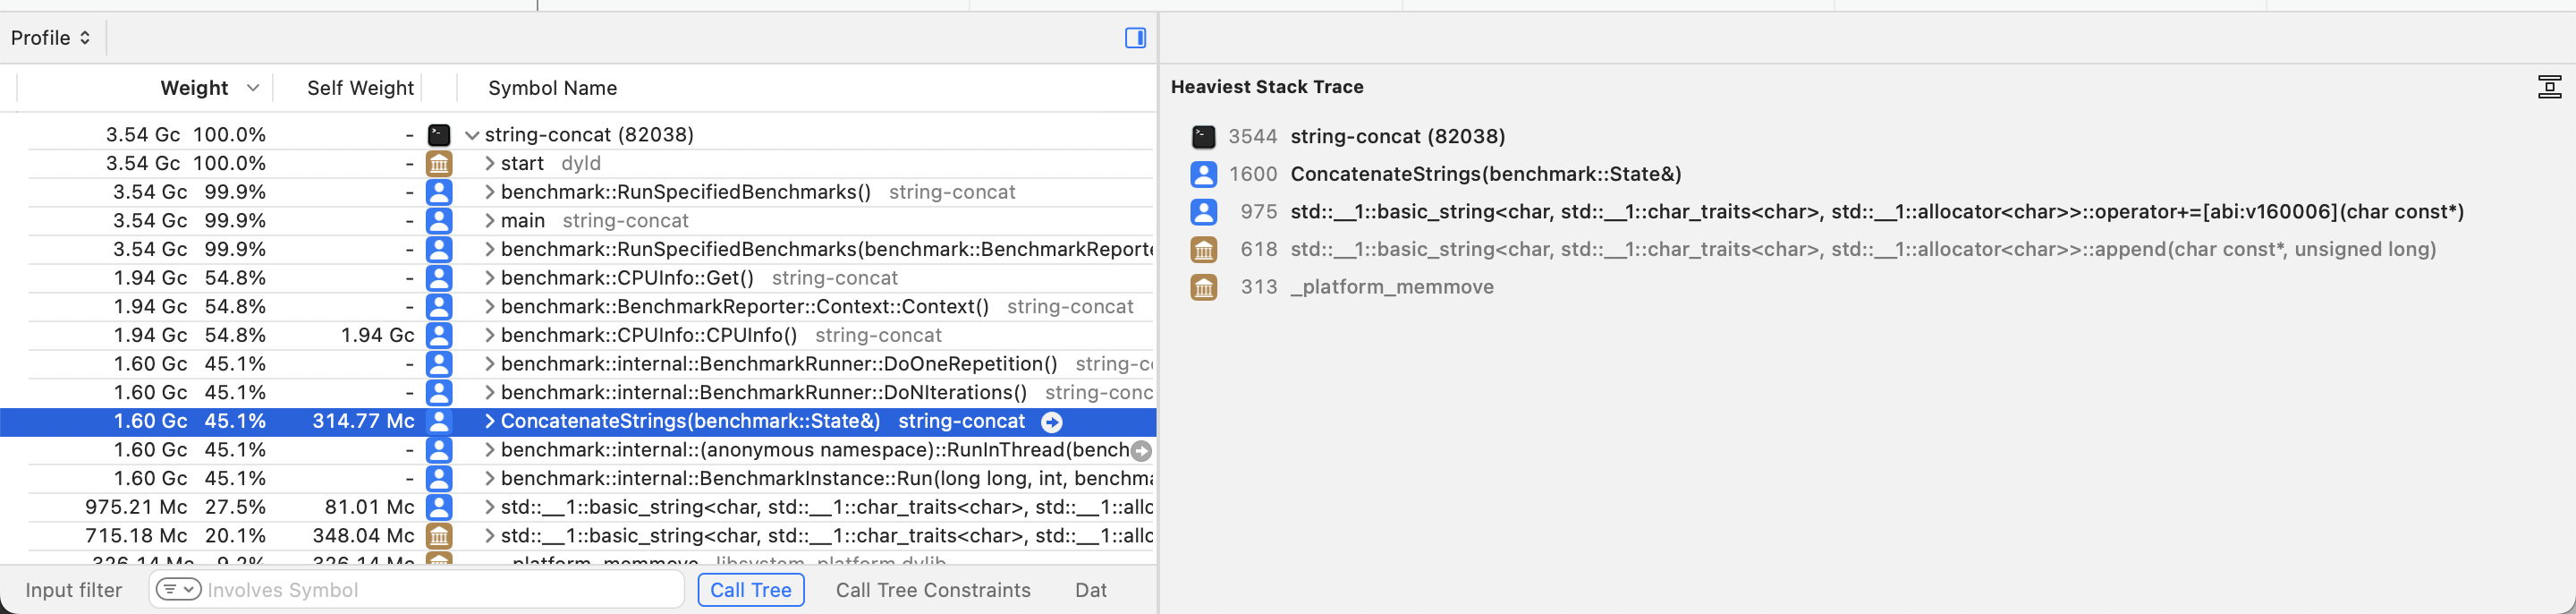 Exploring the heaviest stack trace for the ConcatenateStrings function